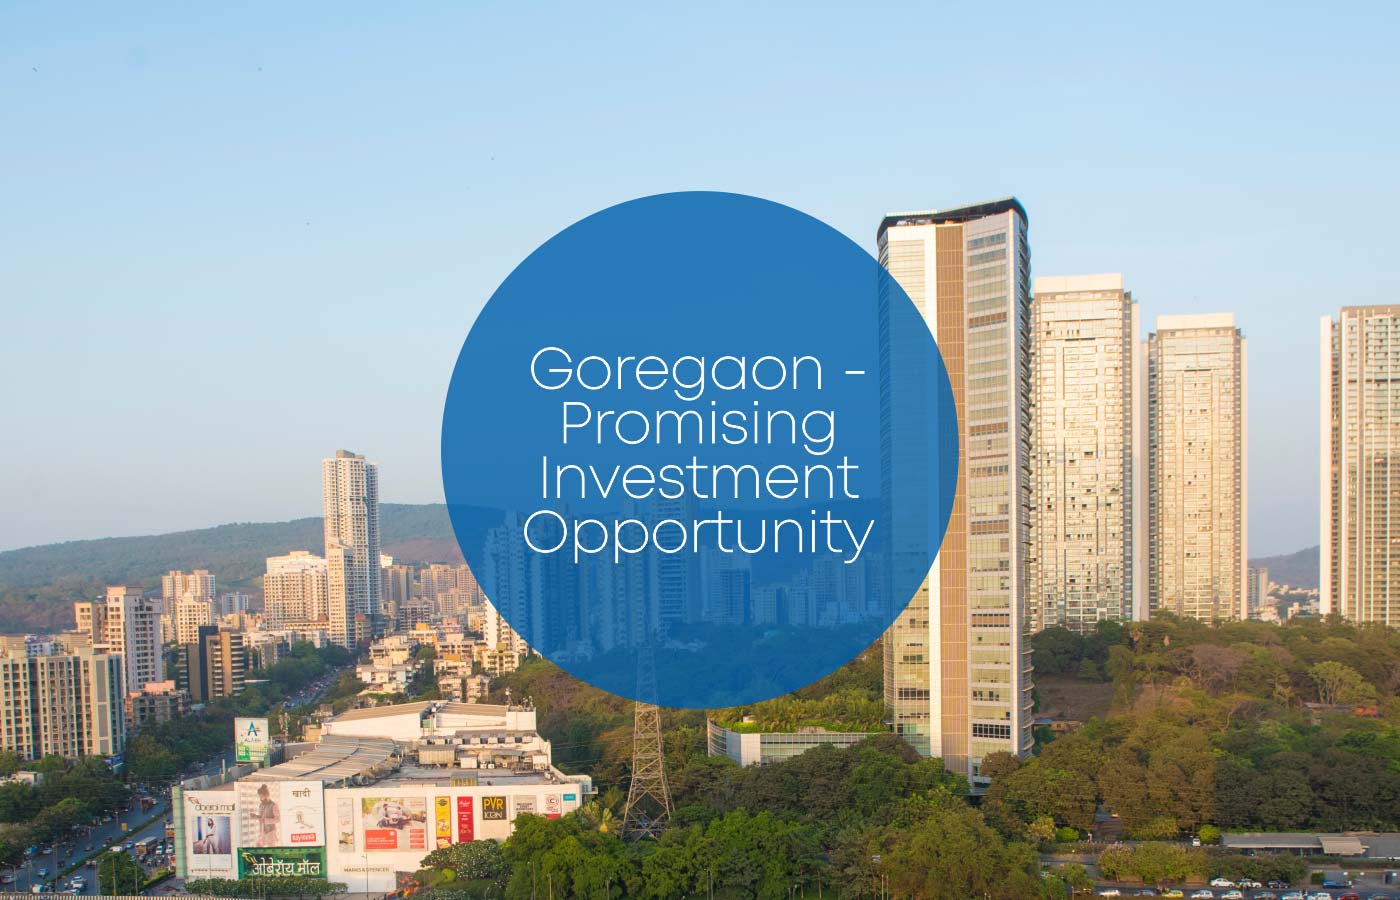 Goregaon - Promising Investment Opportunity